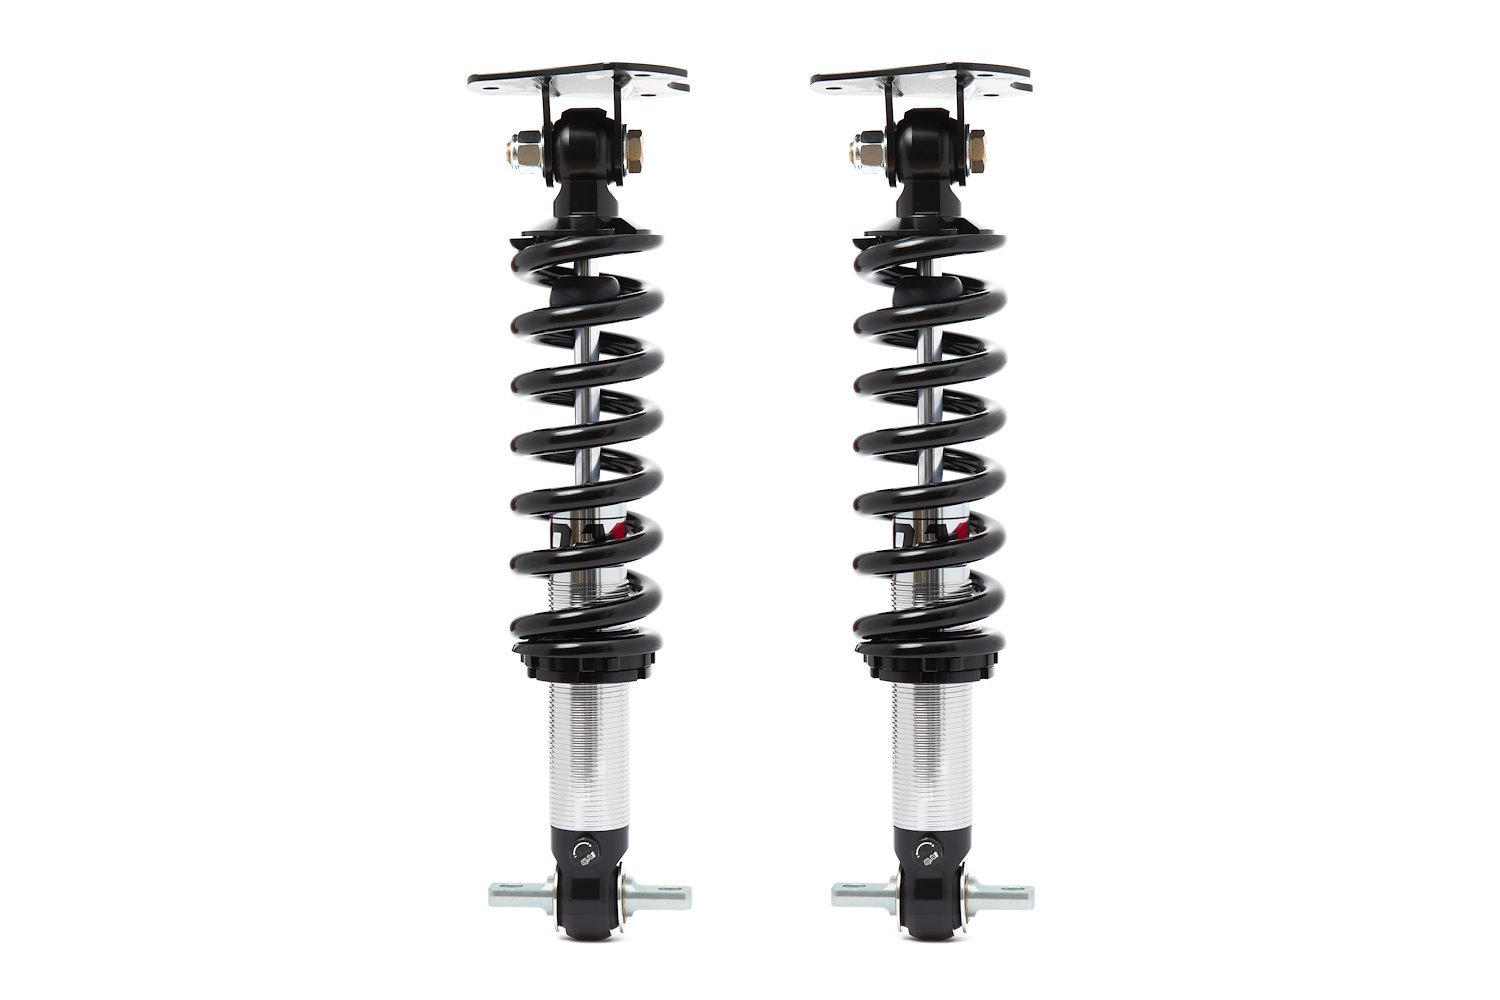 GS518-10950 Front Pro Coil Kit w/Single-Adjustable Shocks for 2007-2018 Chevy Silverado, GMC Sierra 4WD [950 lb. Springs]